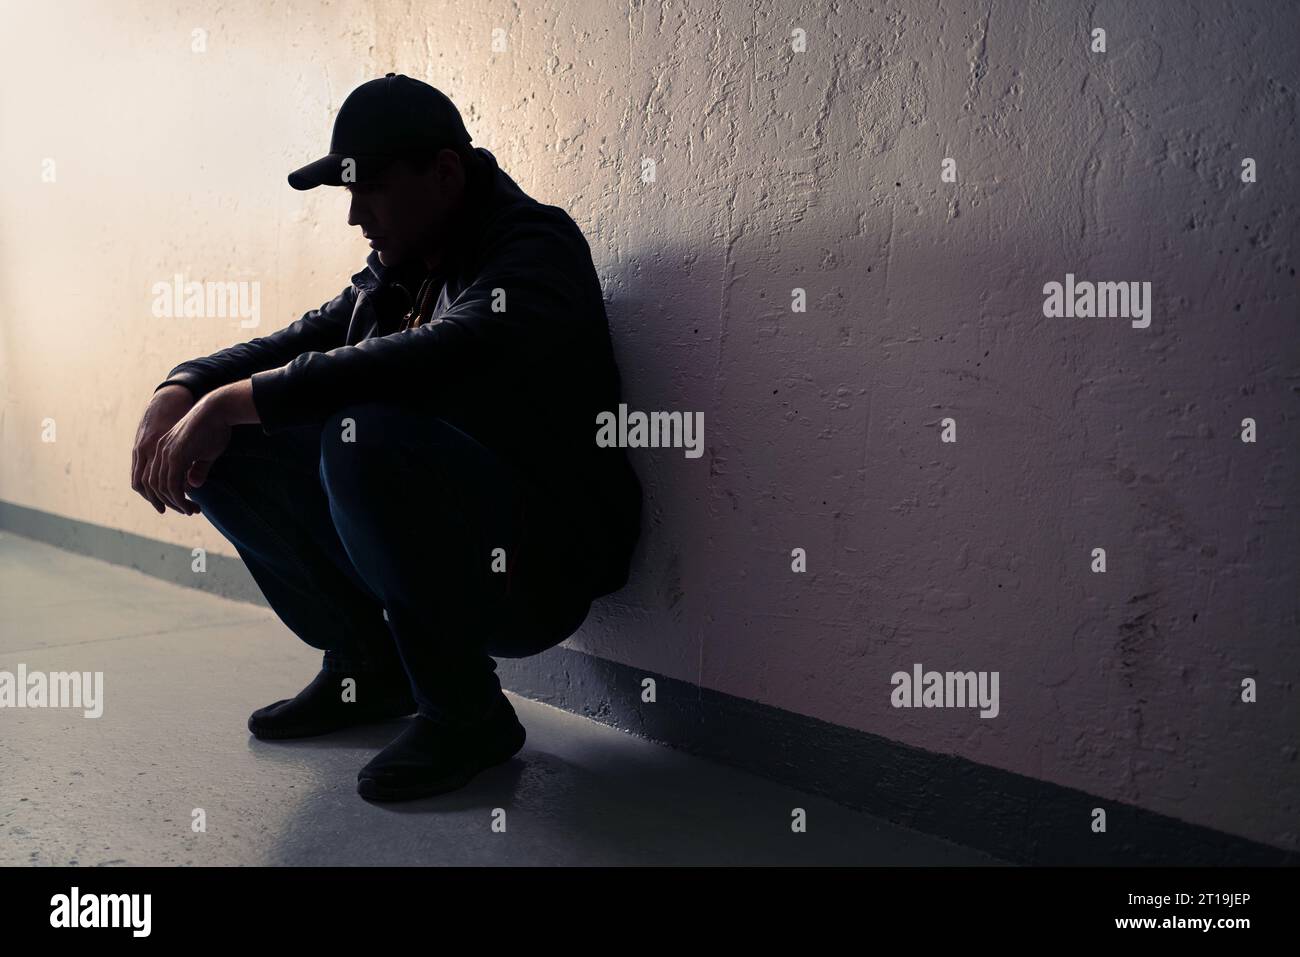 Man with trauma, shame or anxiety. Sad desperate young guy or teenage boy. Drug addiction or despair. Criminal outcast or homeless person with stress. Stock Photo